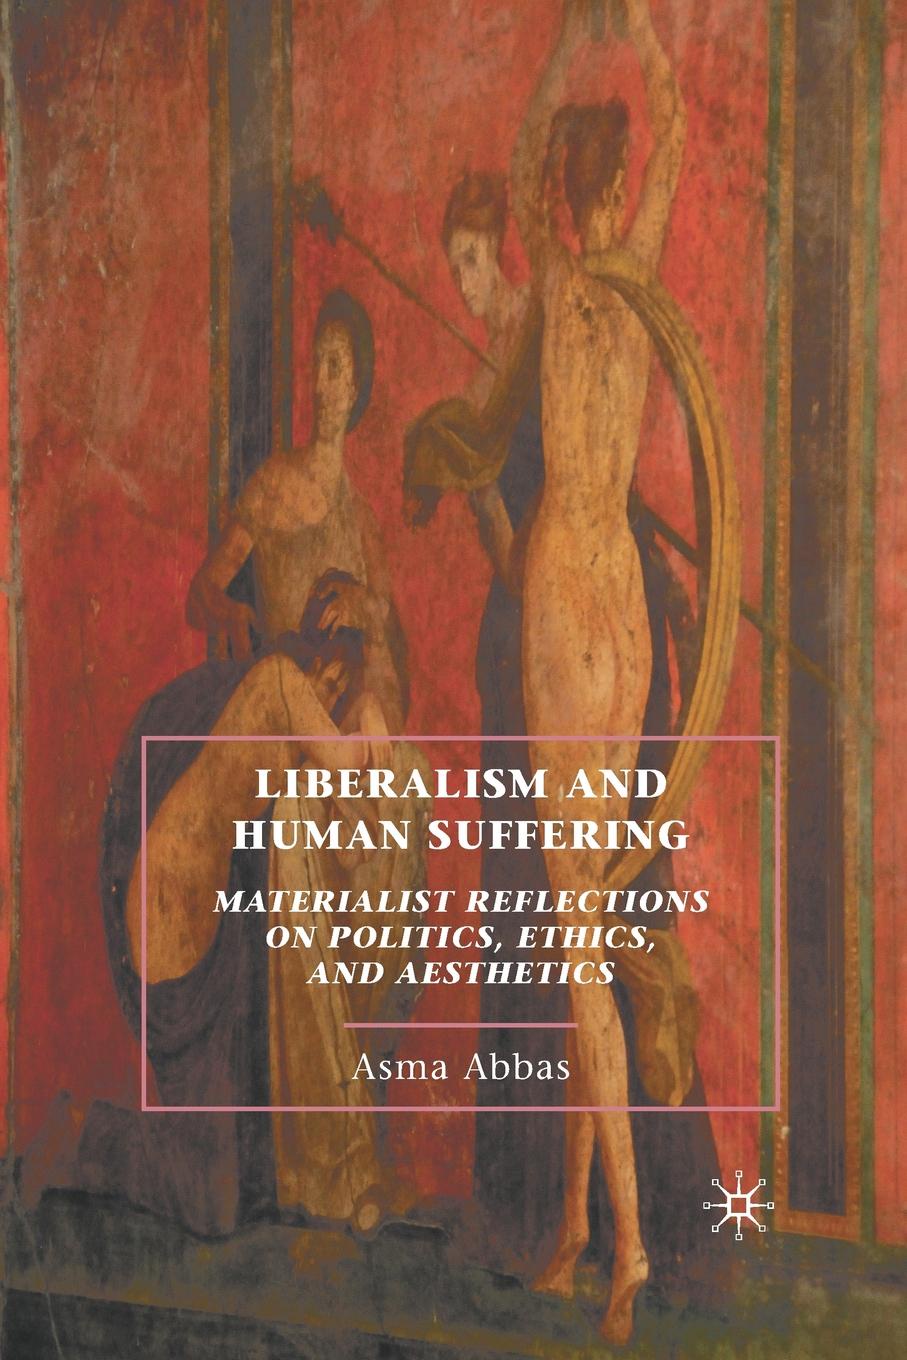 Liberalism and Human Suffering. Materialist Reflections on Politics, Ethics, and Aesthetics